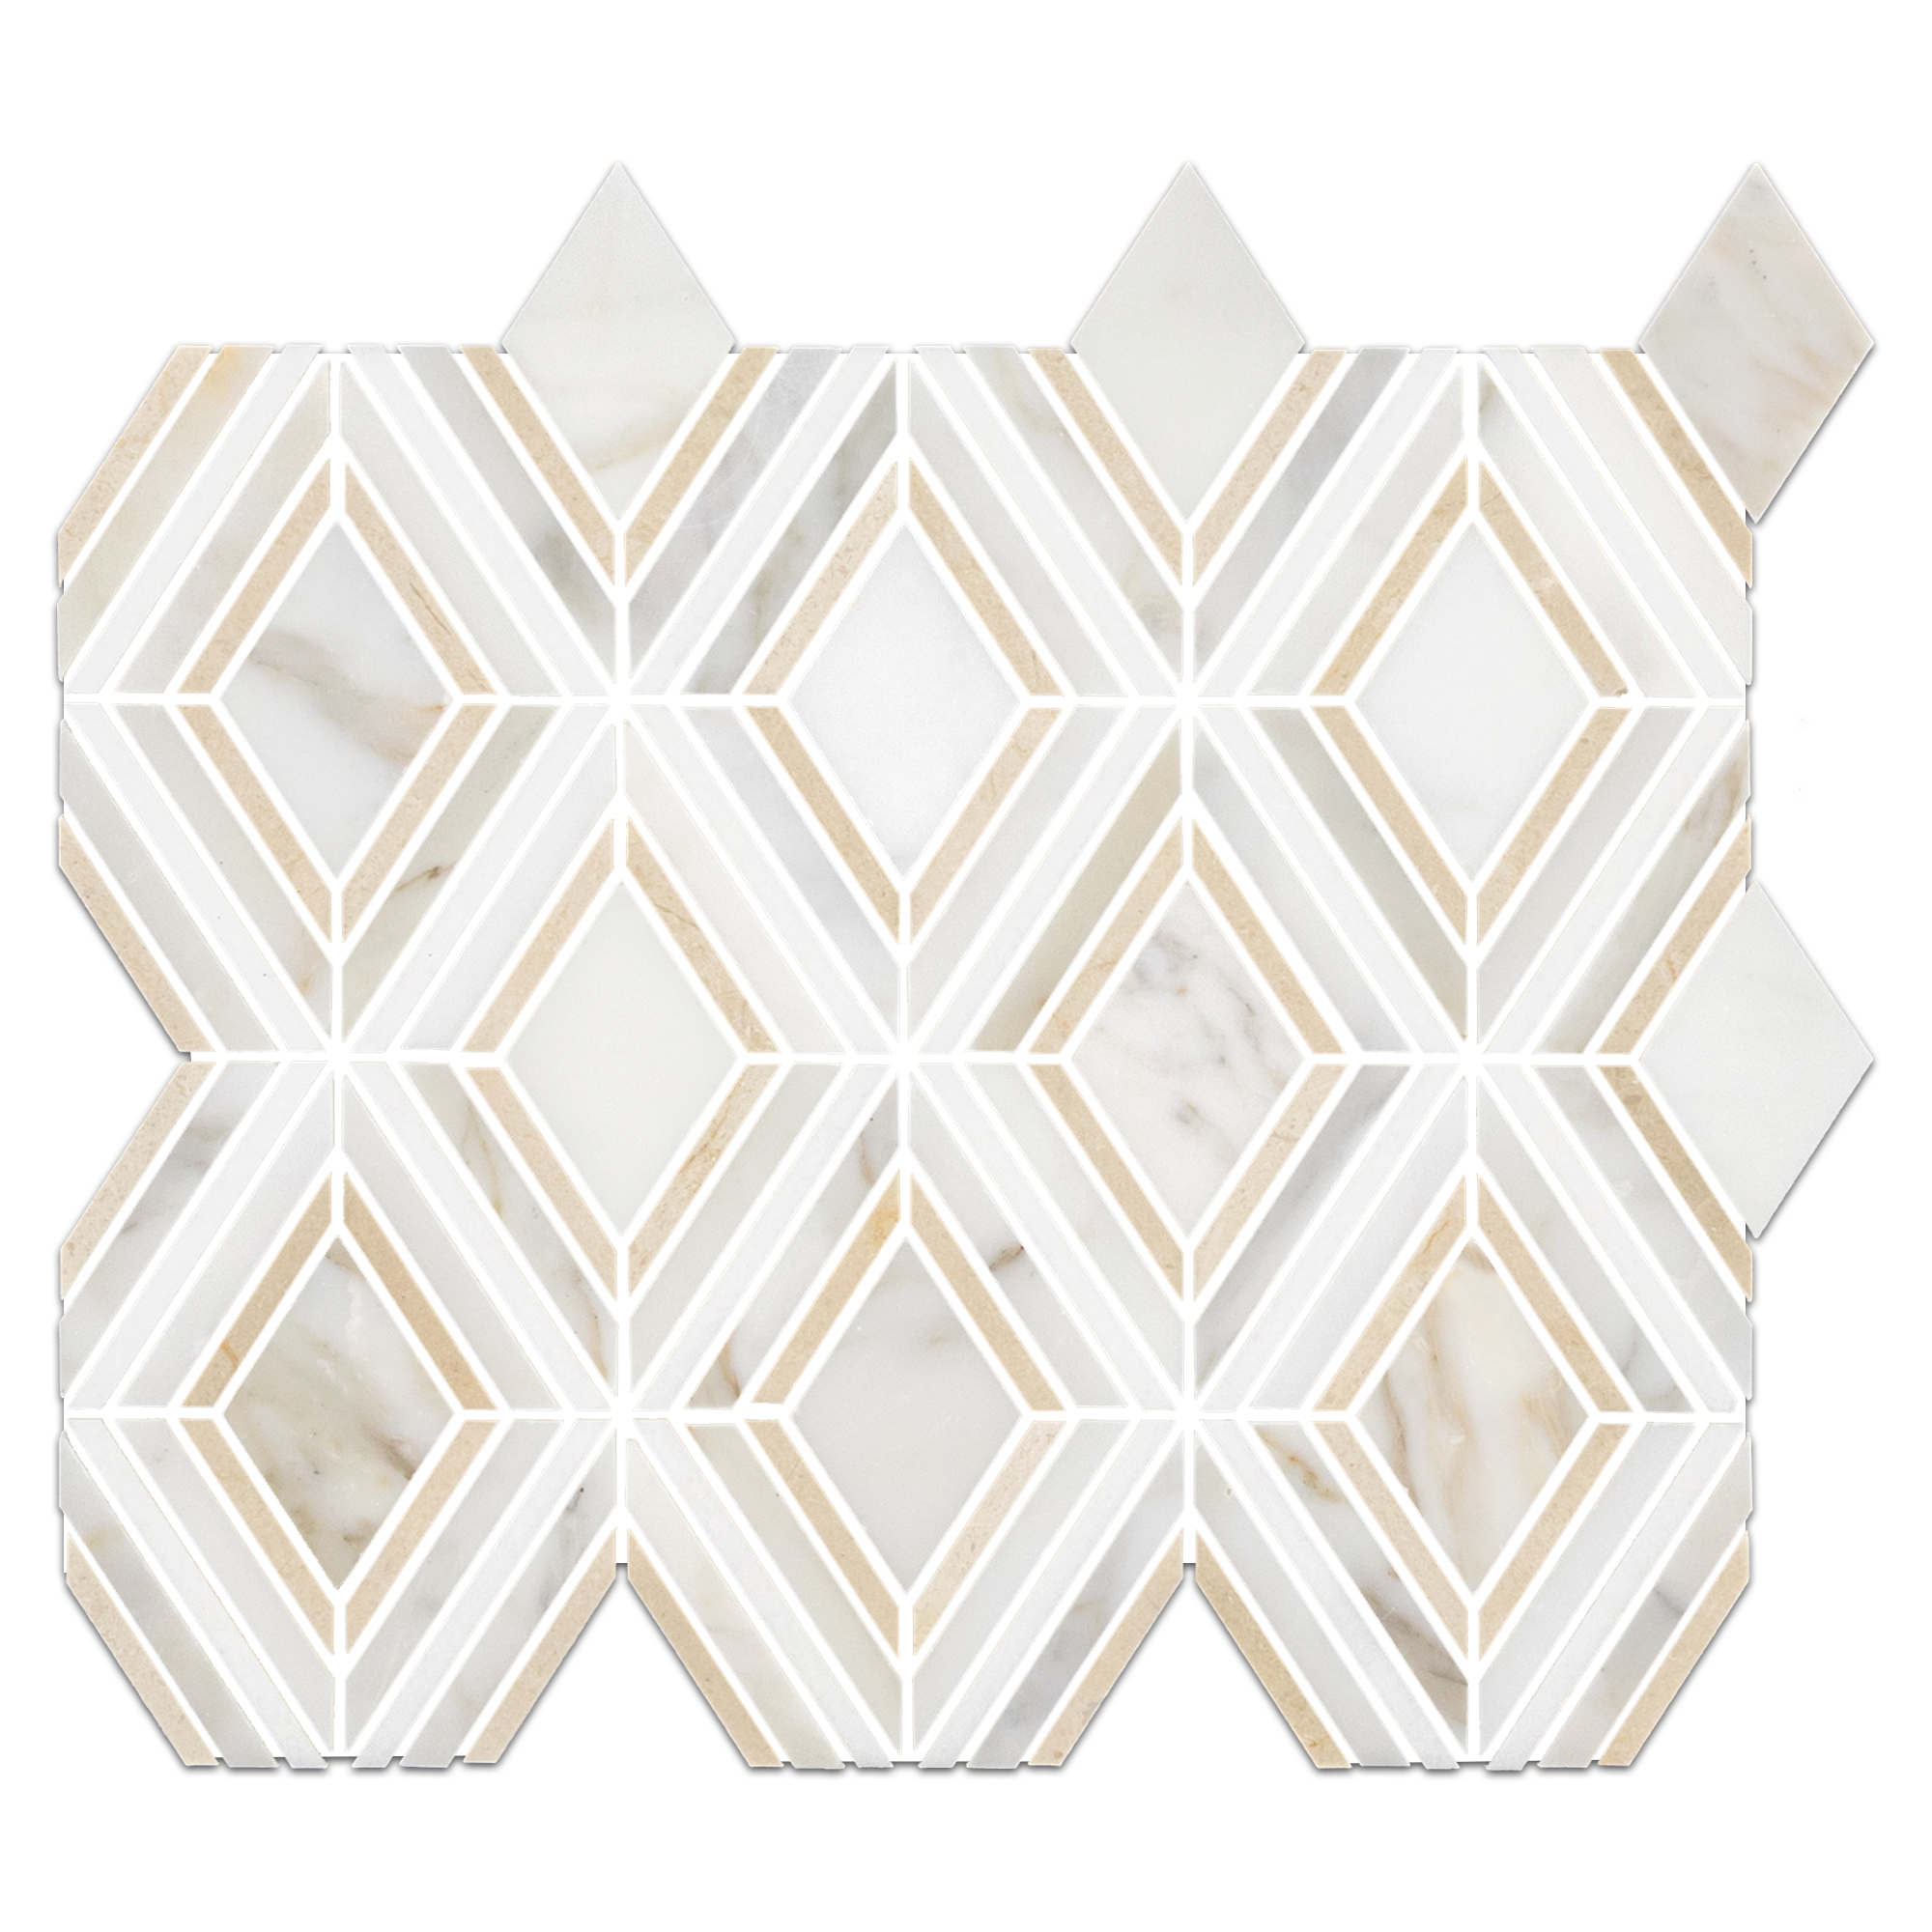 Elon Calacatta Gold, White Thassos & Crema Marfil Marble Outlined Rhomboid Field Mosaic Tile, 11.125x13", Honed Finish - AM2112H